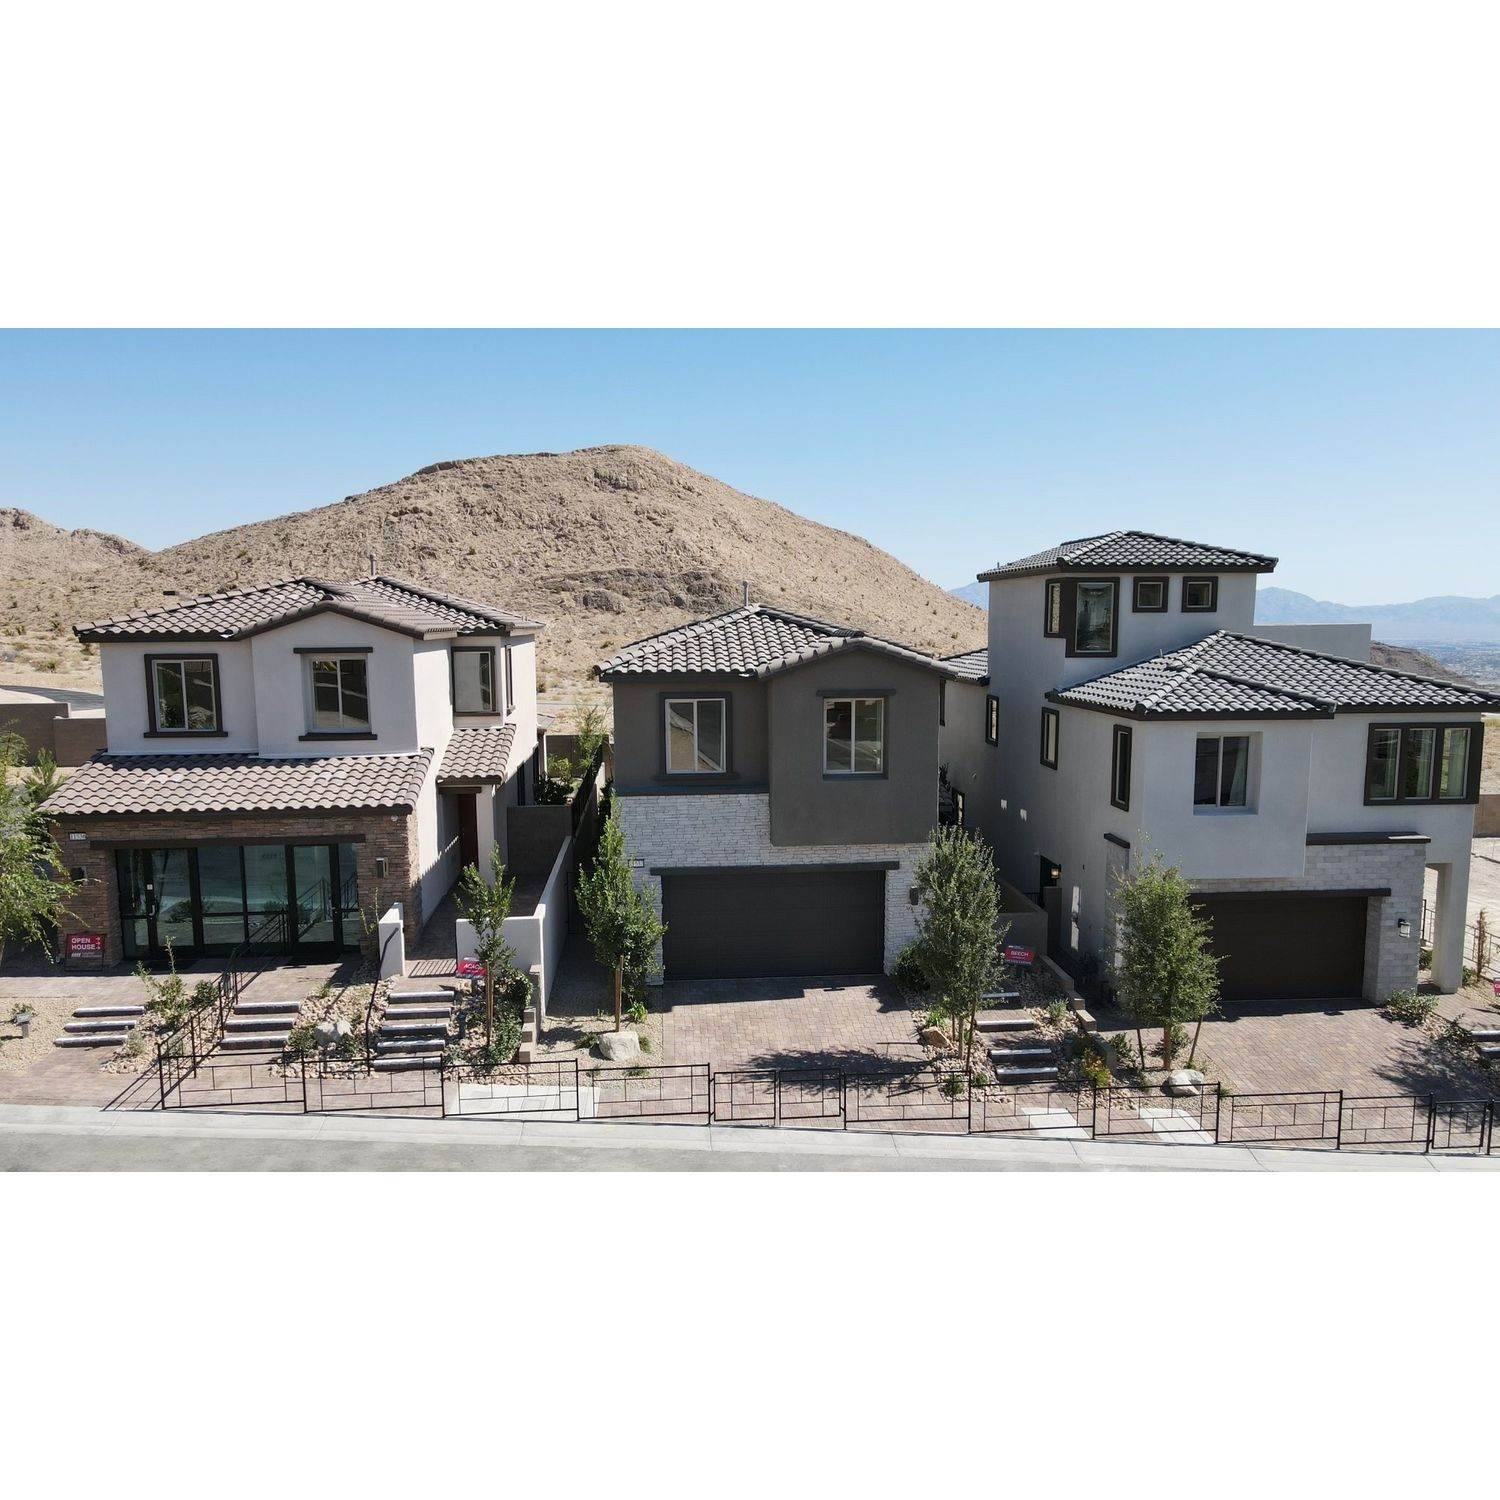 Crested Canyon in Summerlin building at 11536 Desert Hollow Avenue, Summerlin North, Las Vegas, NV 89138